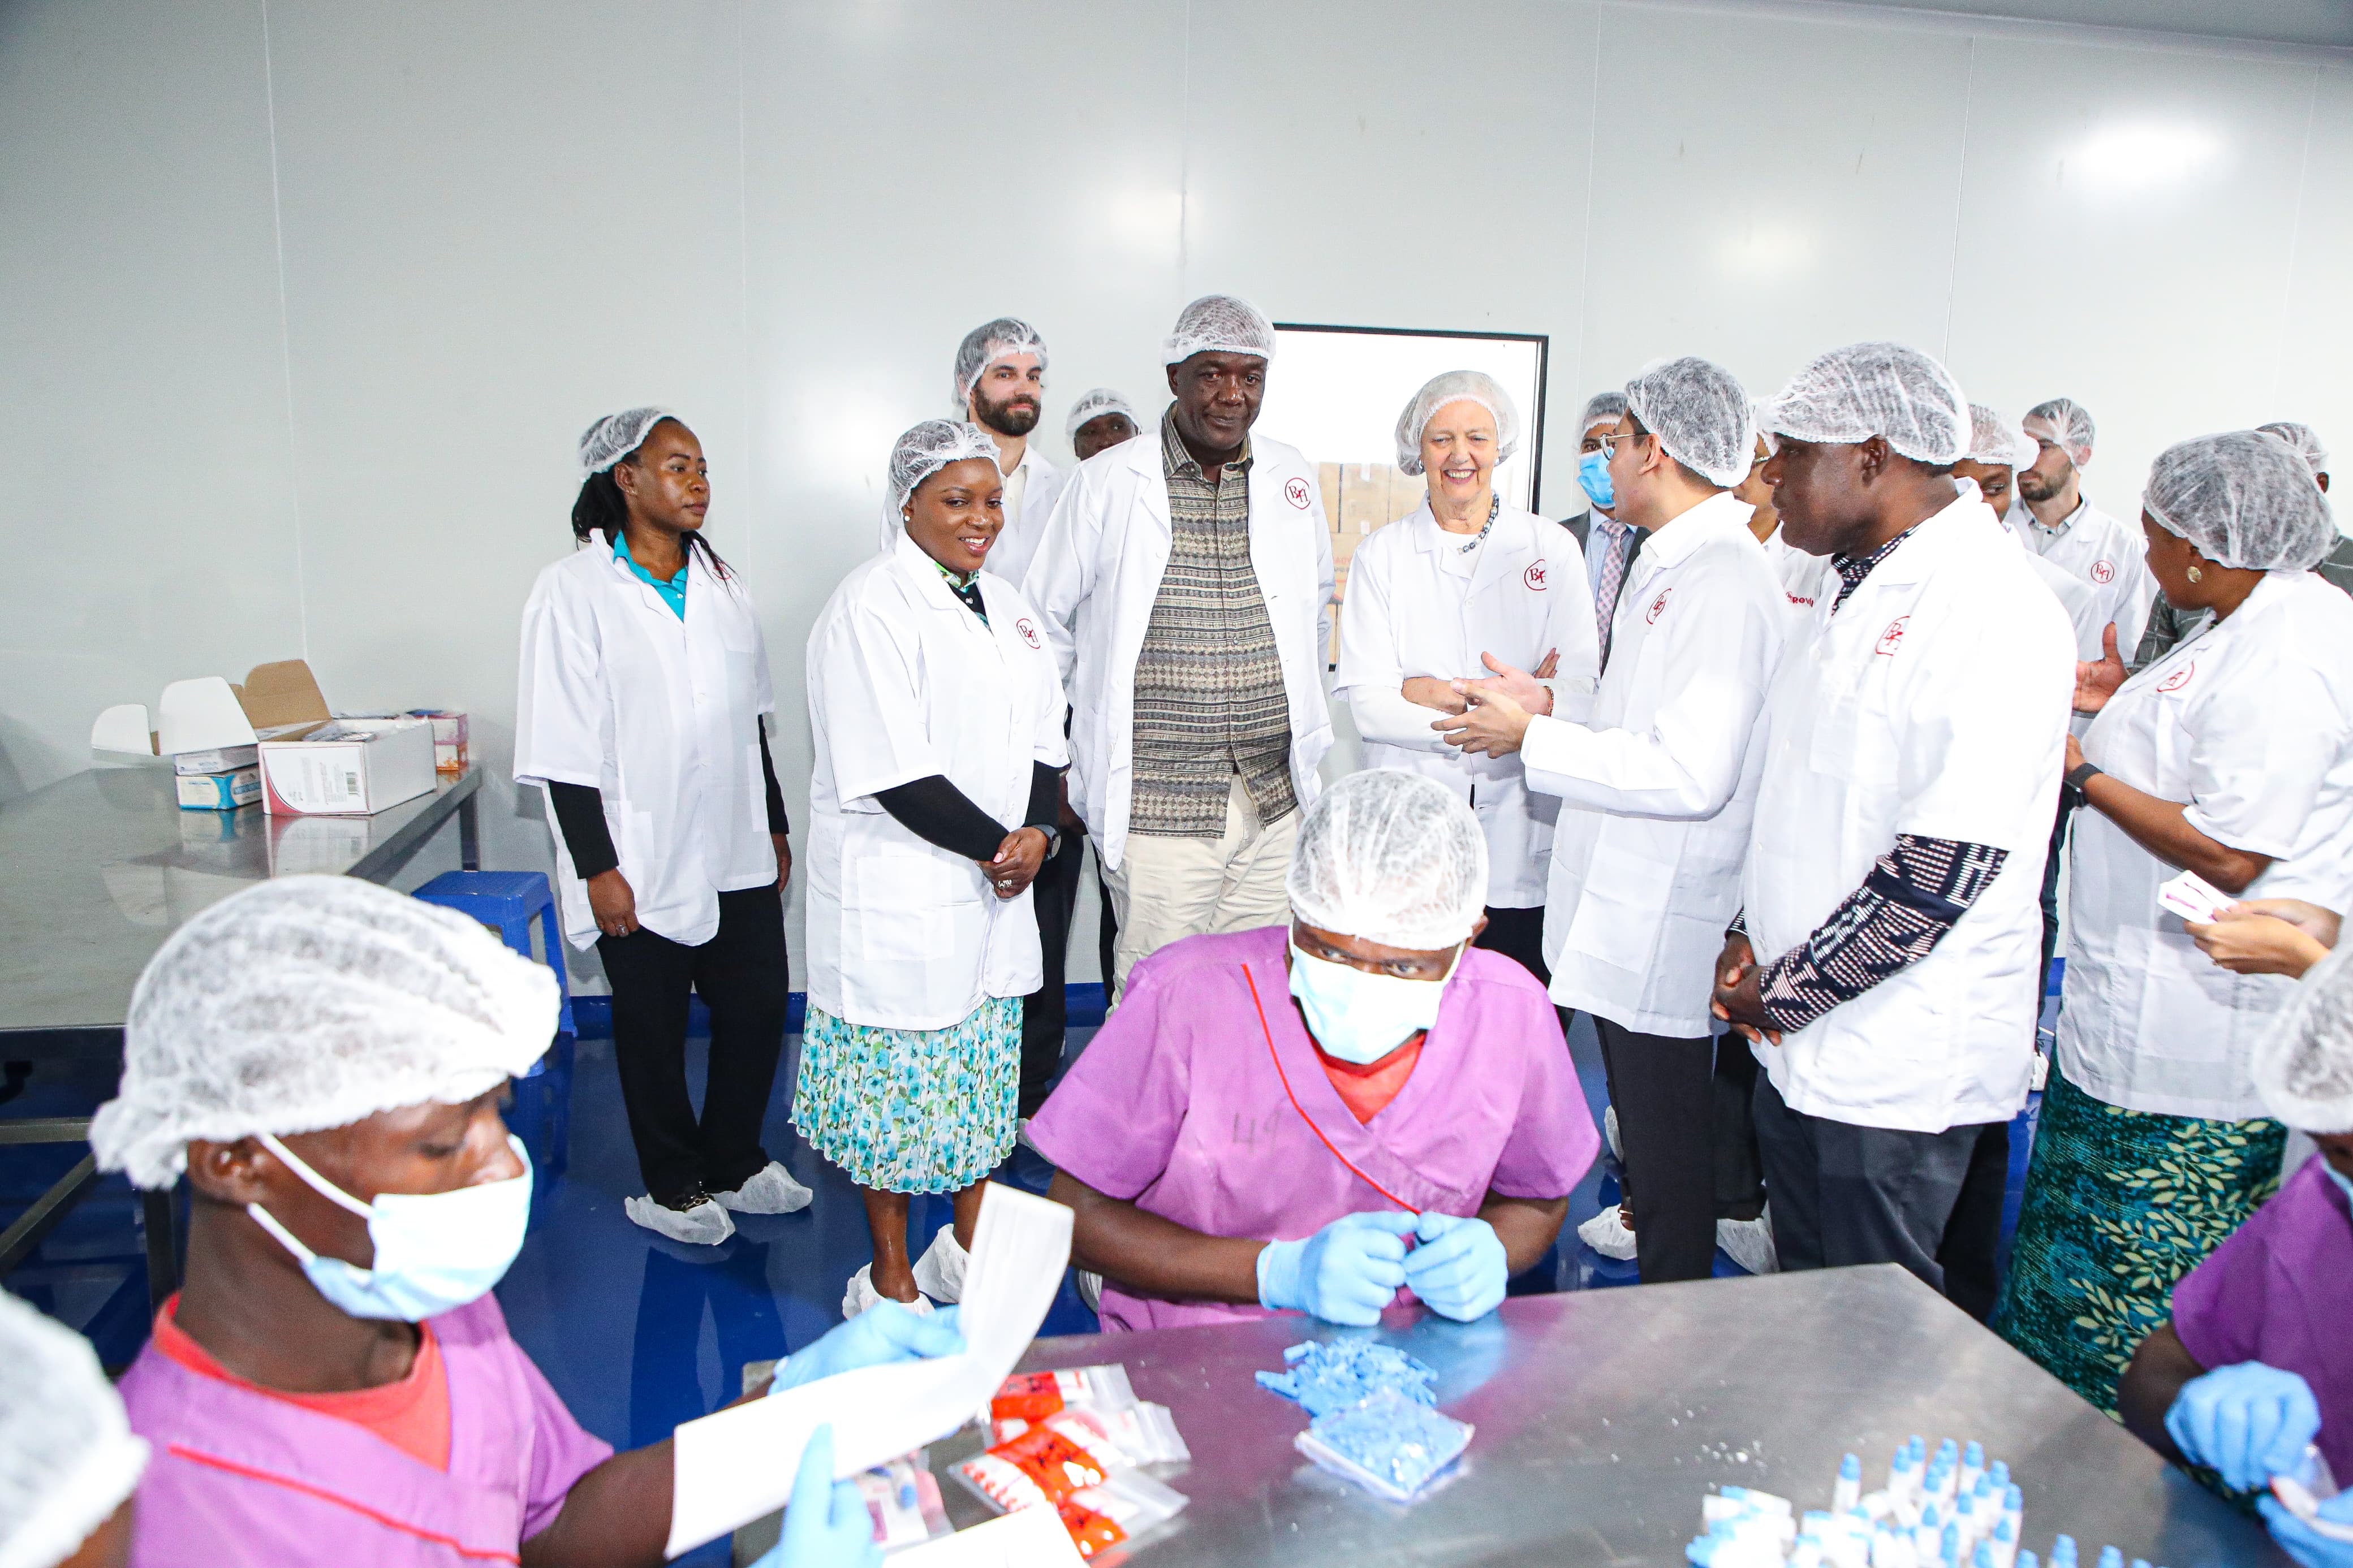 Revital Manufacturing Facility in Kilifi County launched